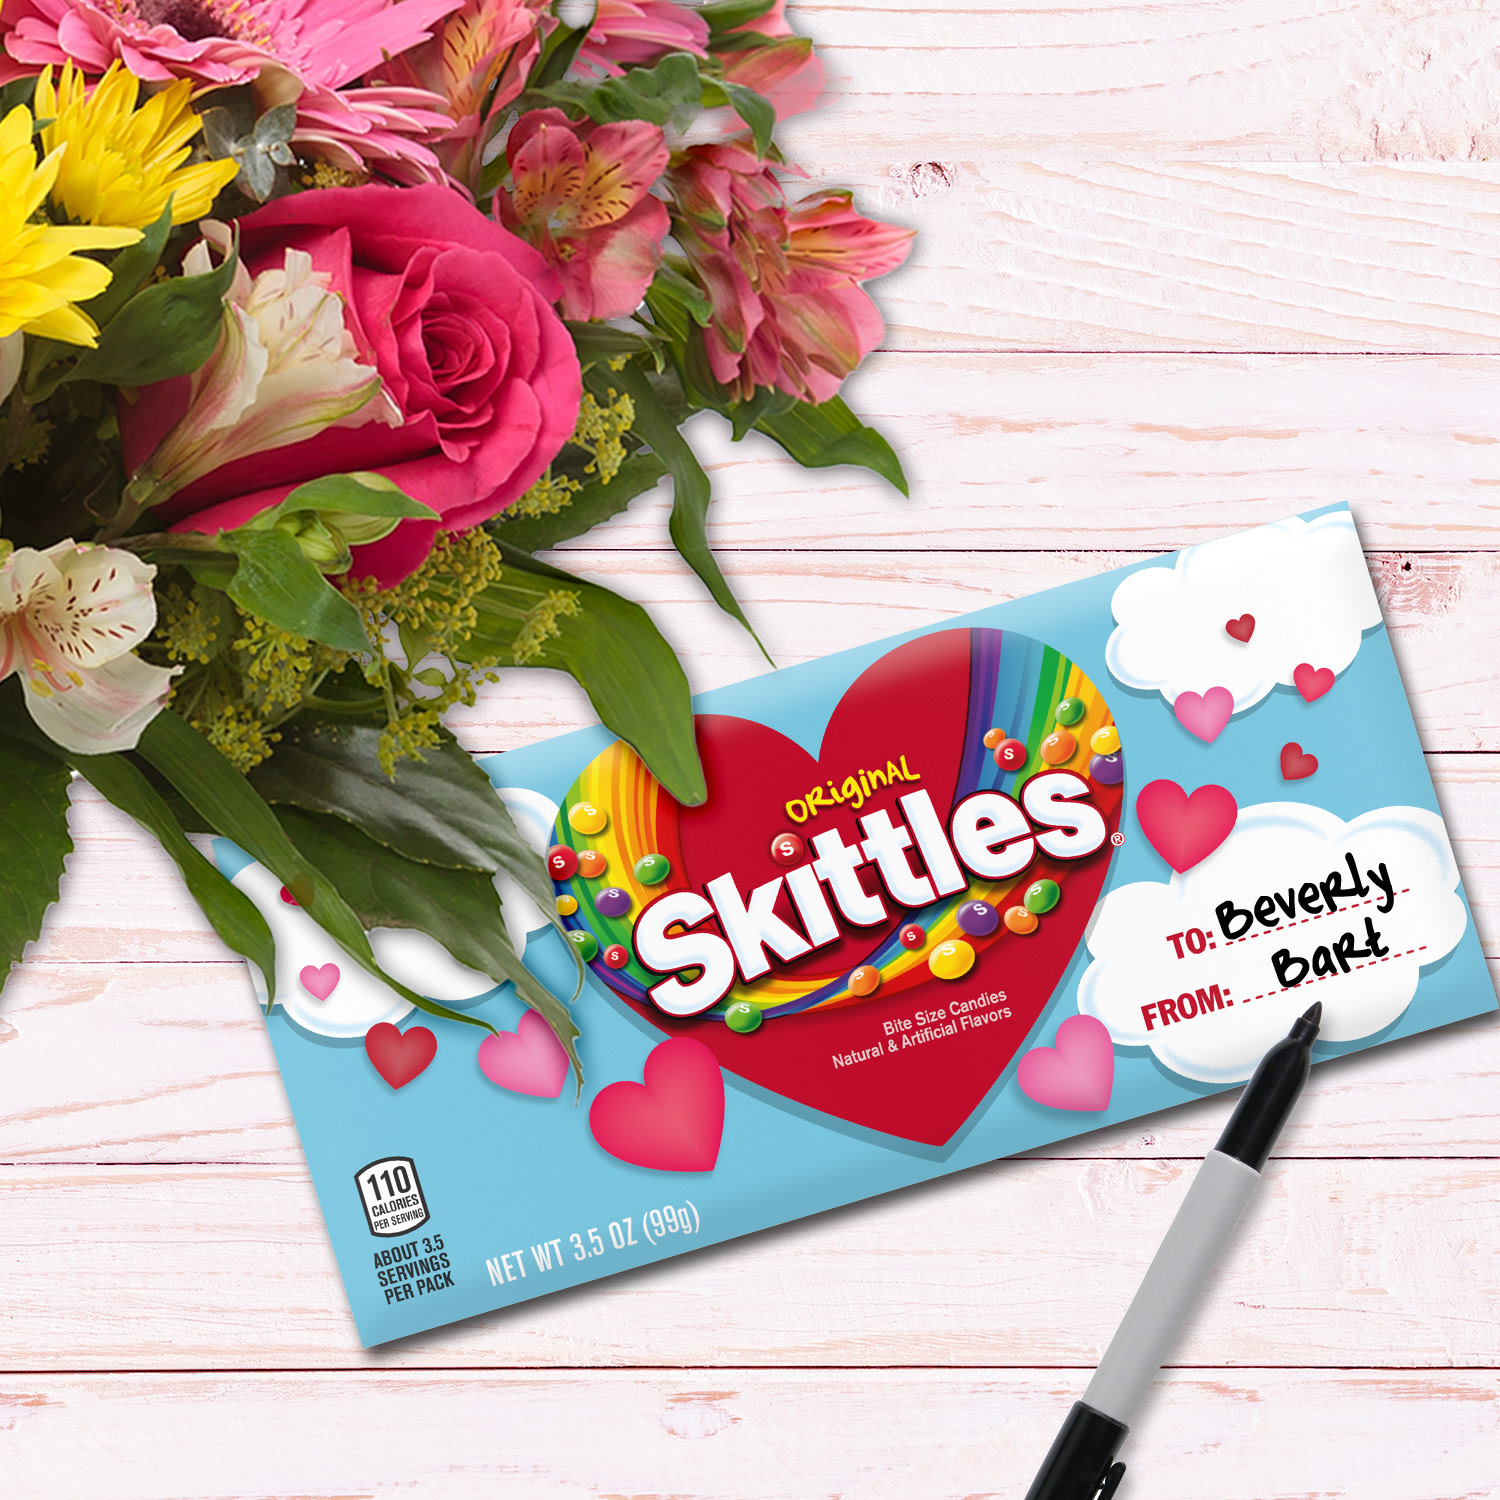 Skittles Original Chewy Candy Valentines Candy Box - 3.5 oz - image 3 of 13